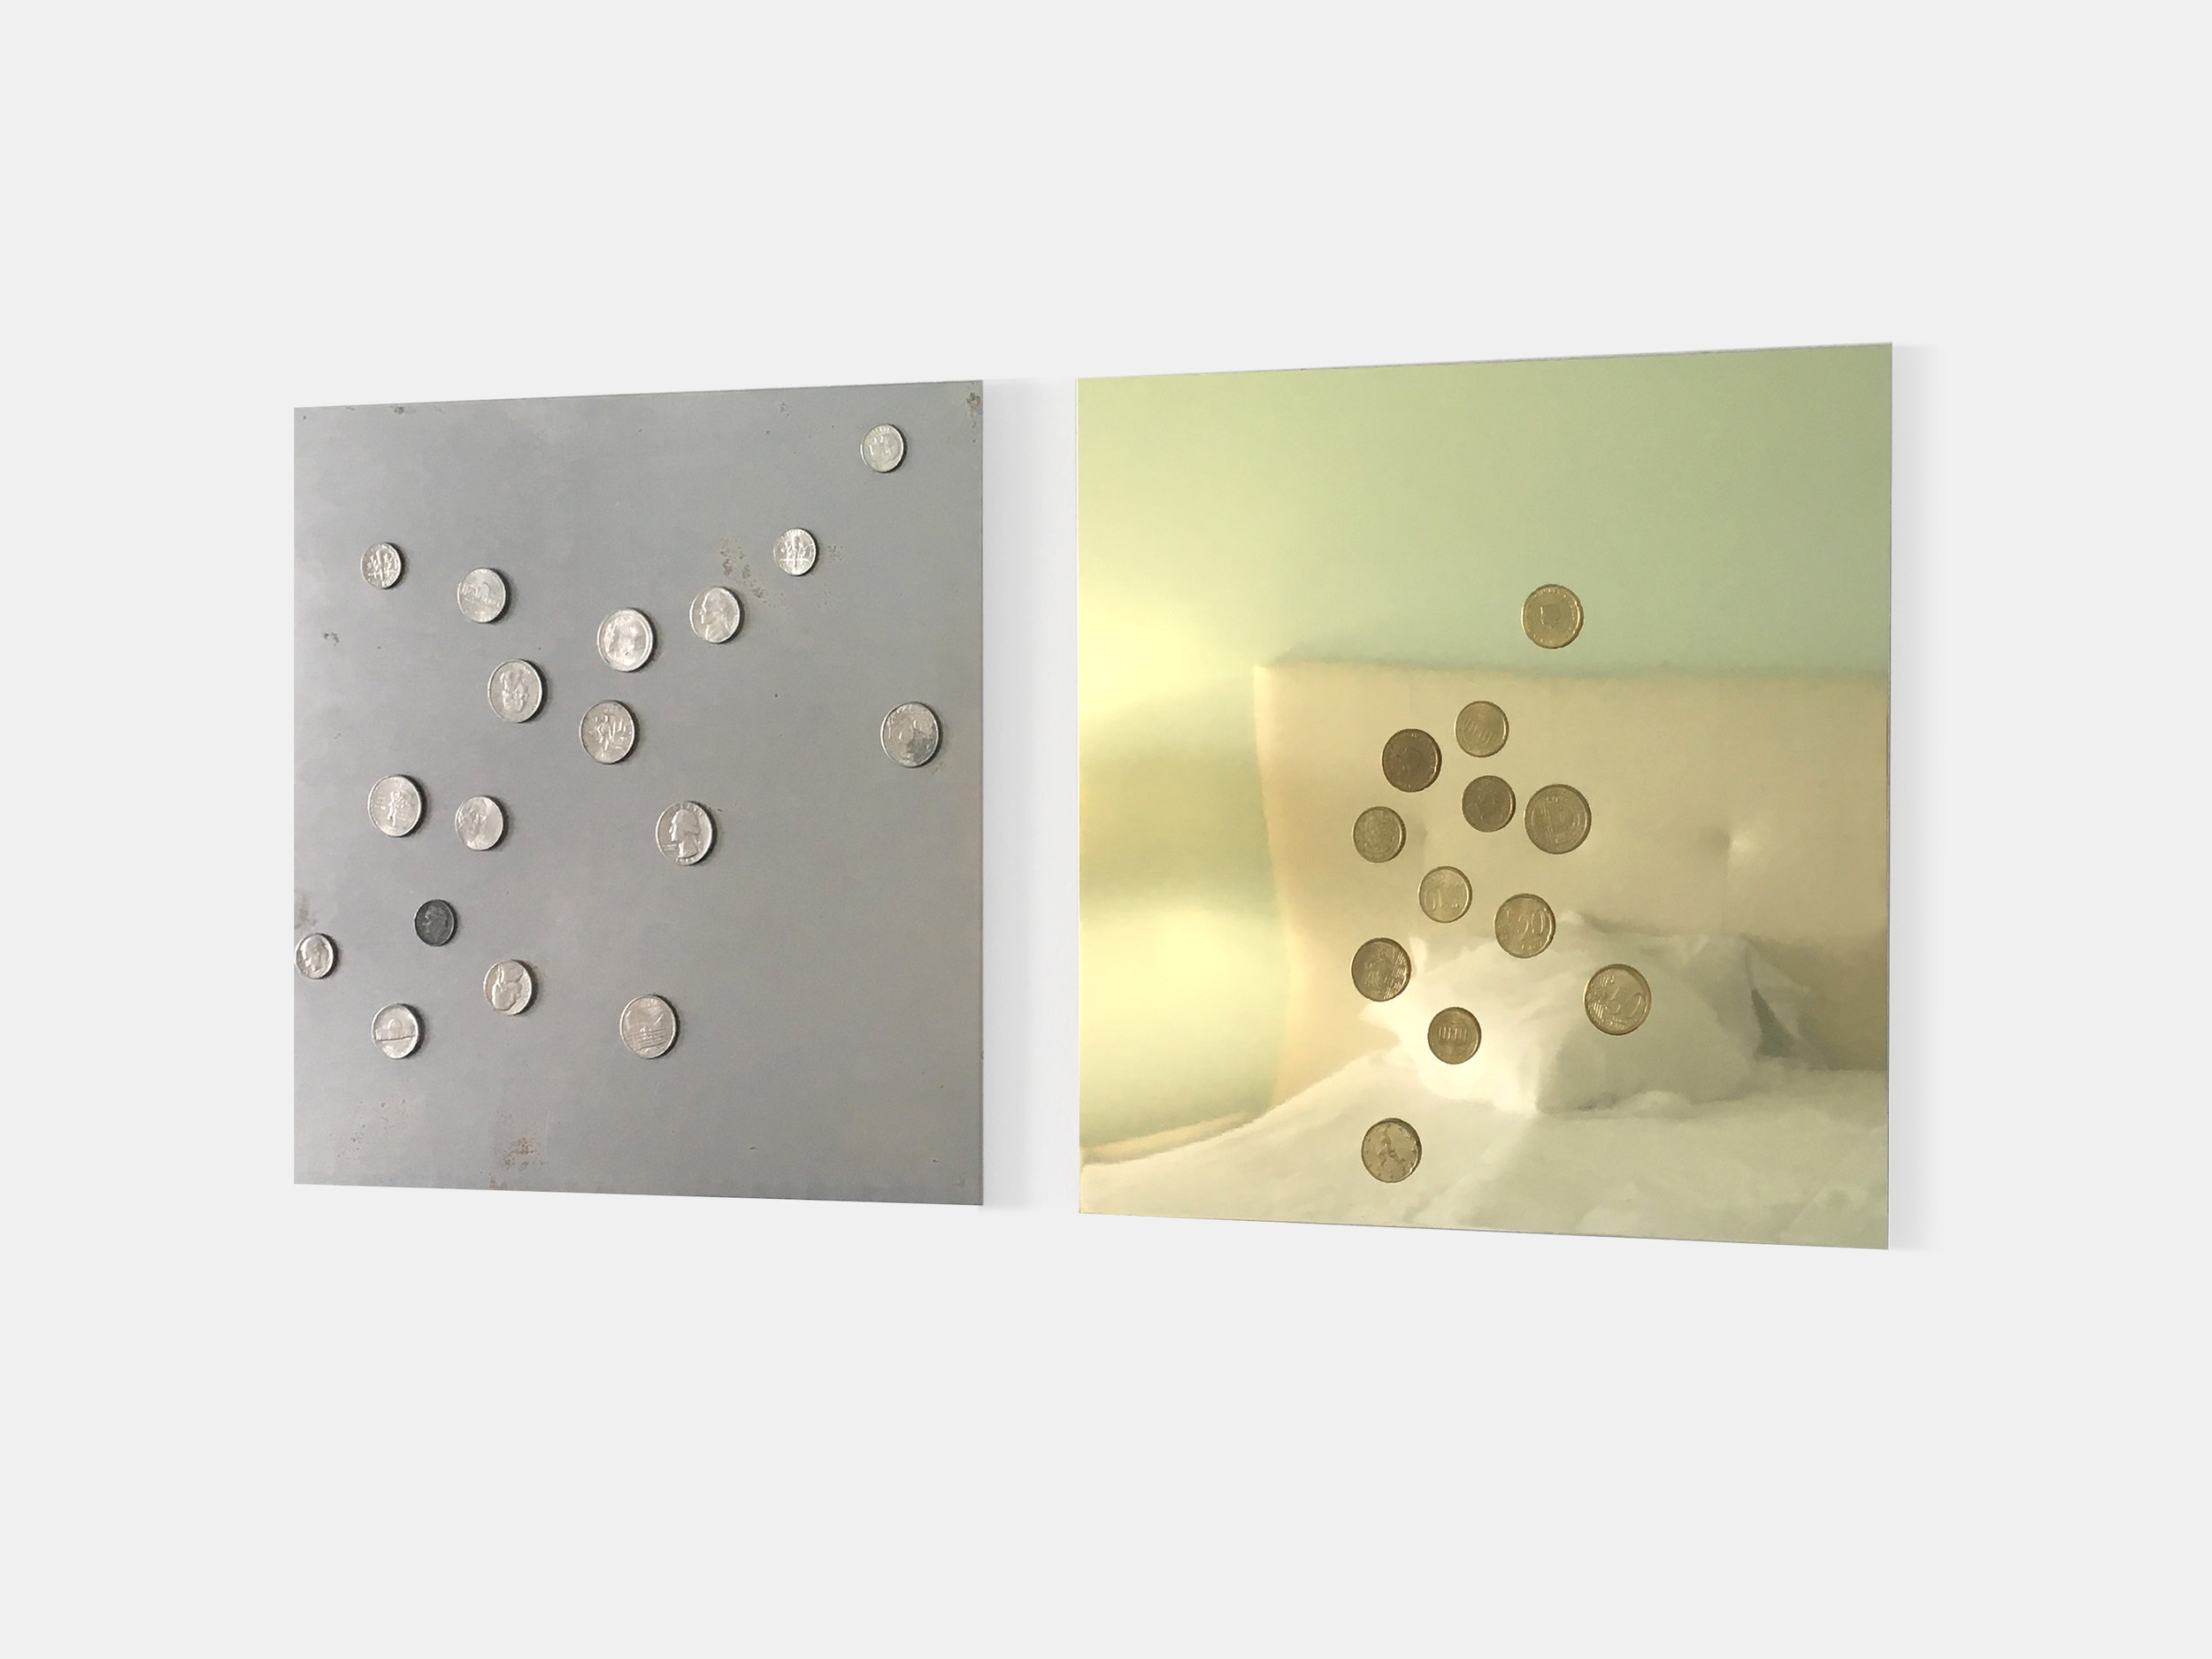  Mikkel Carl  Britney Survived 2007 – You Can Handle Today (1) , 2016 United States coin currency on milled steel sheet (left panel), Eurocents on anodized aluminum sheet (right panel) 12 x 12 inches (31 x 31 cm) each MC4 